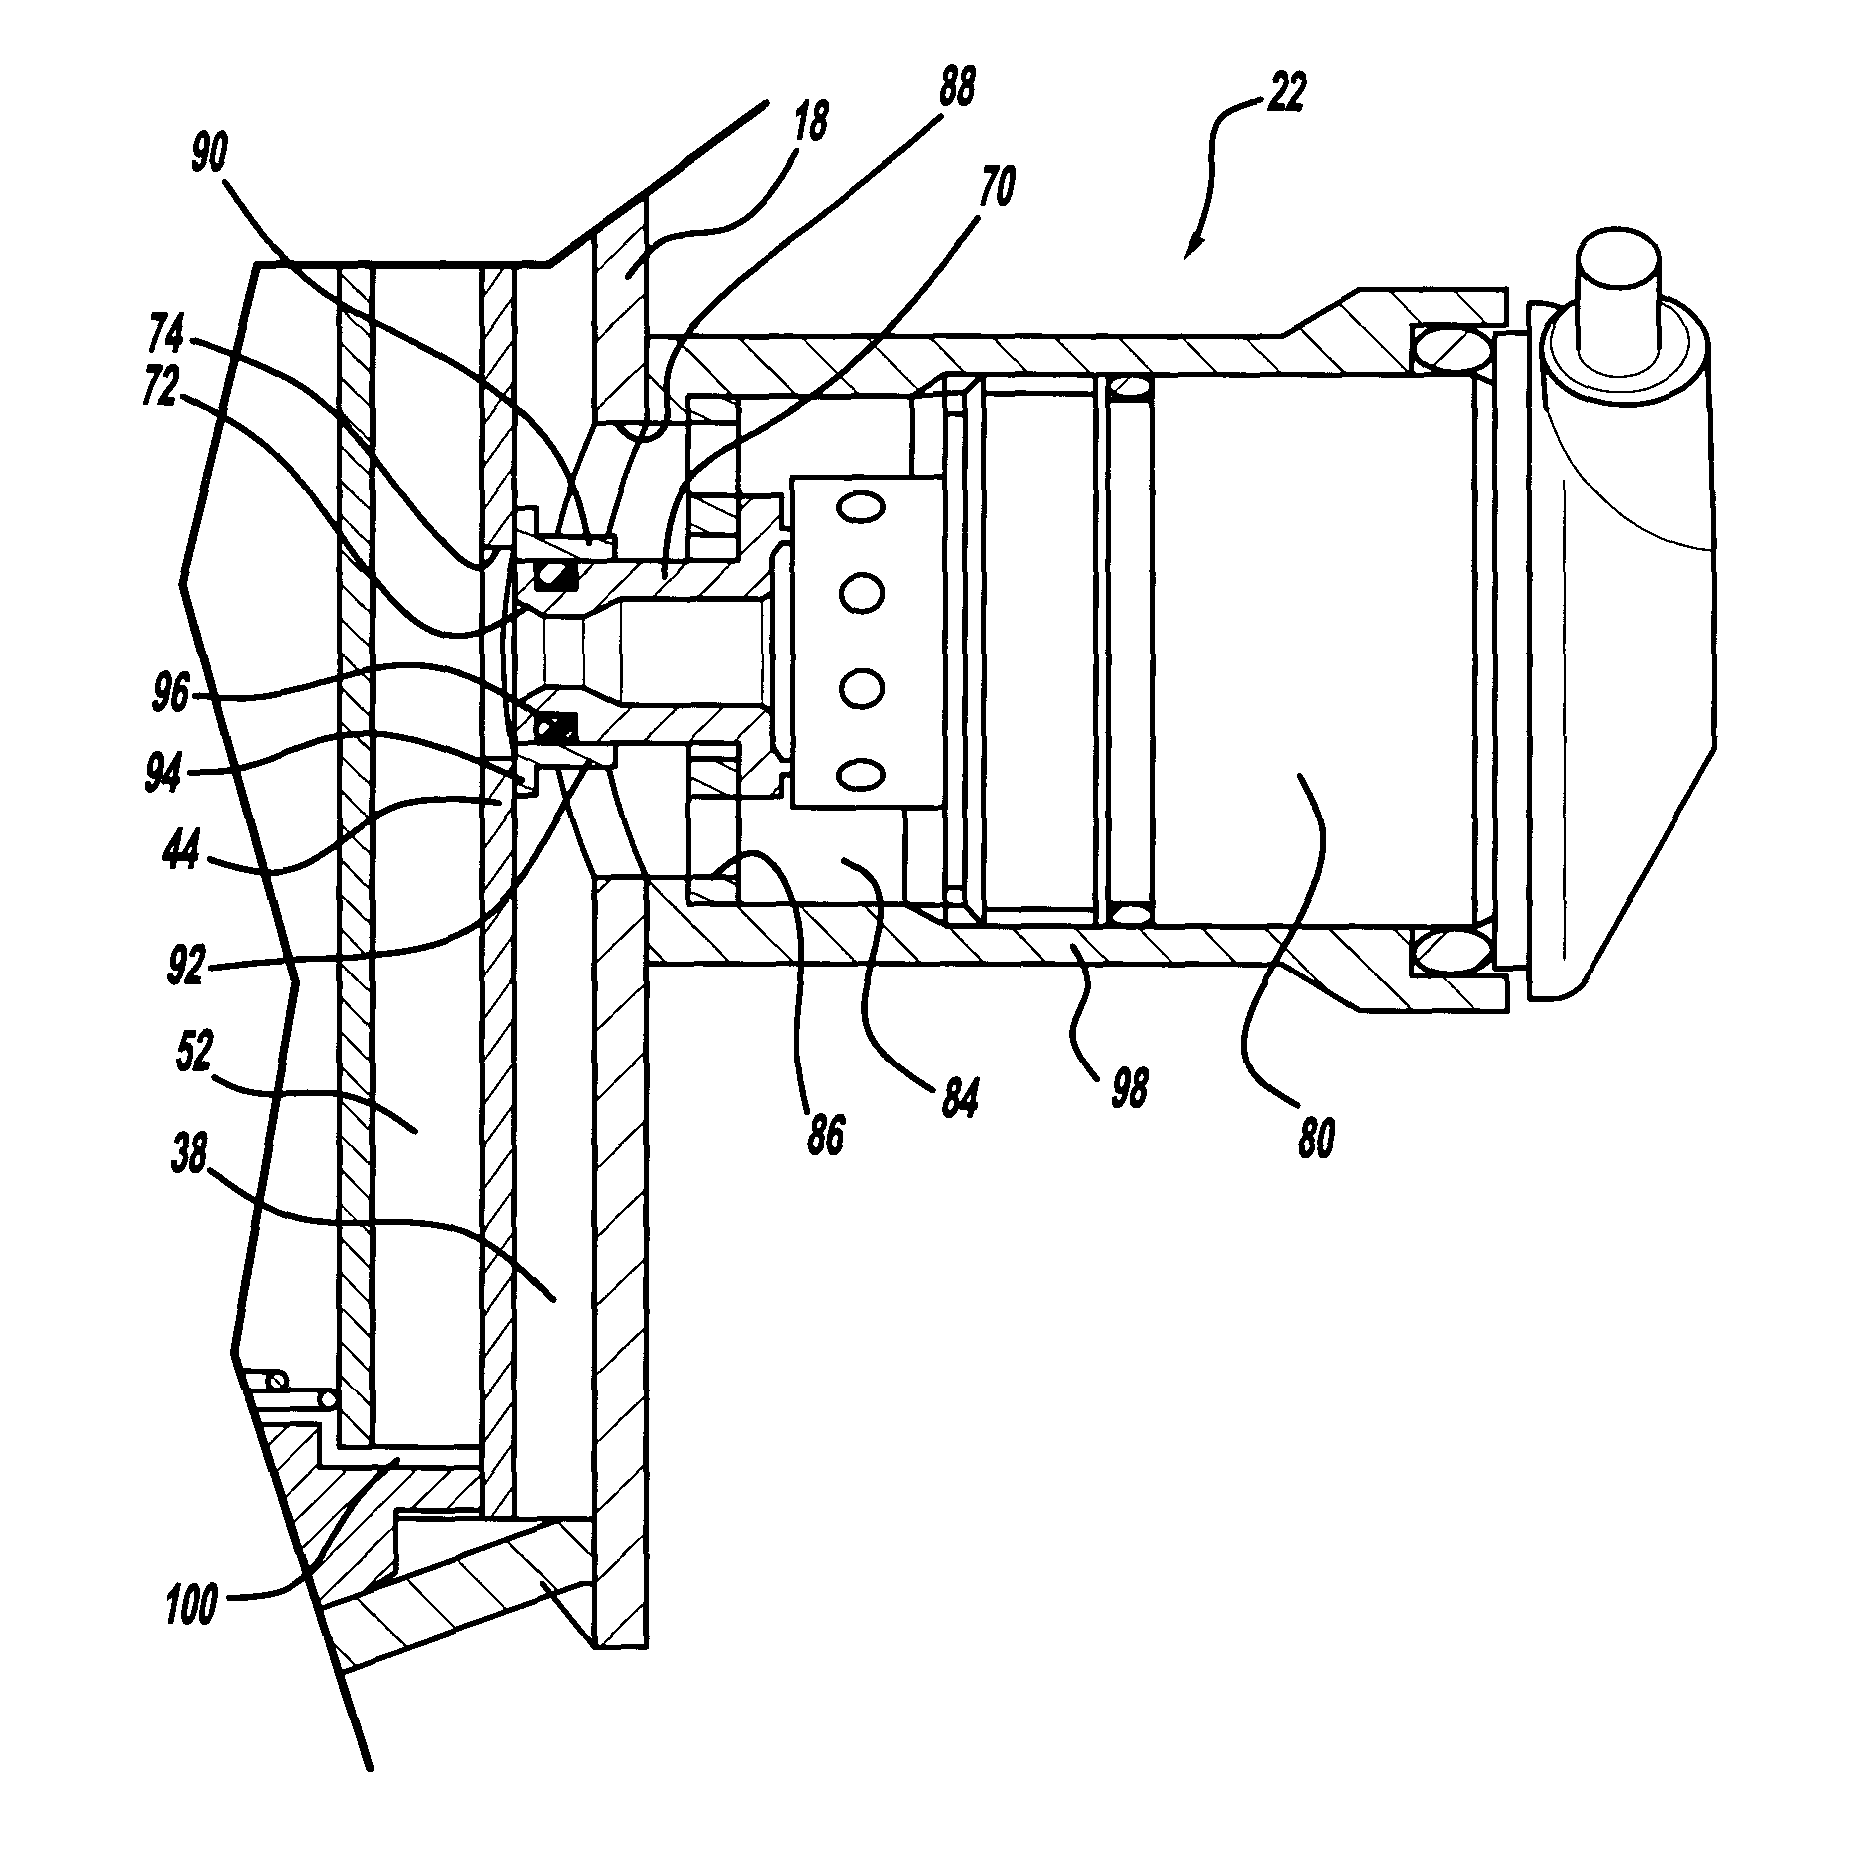 Adjustable damper with control valve, mounted in an external collar